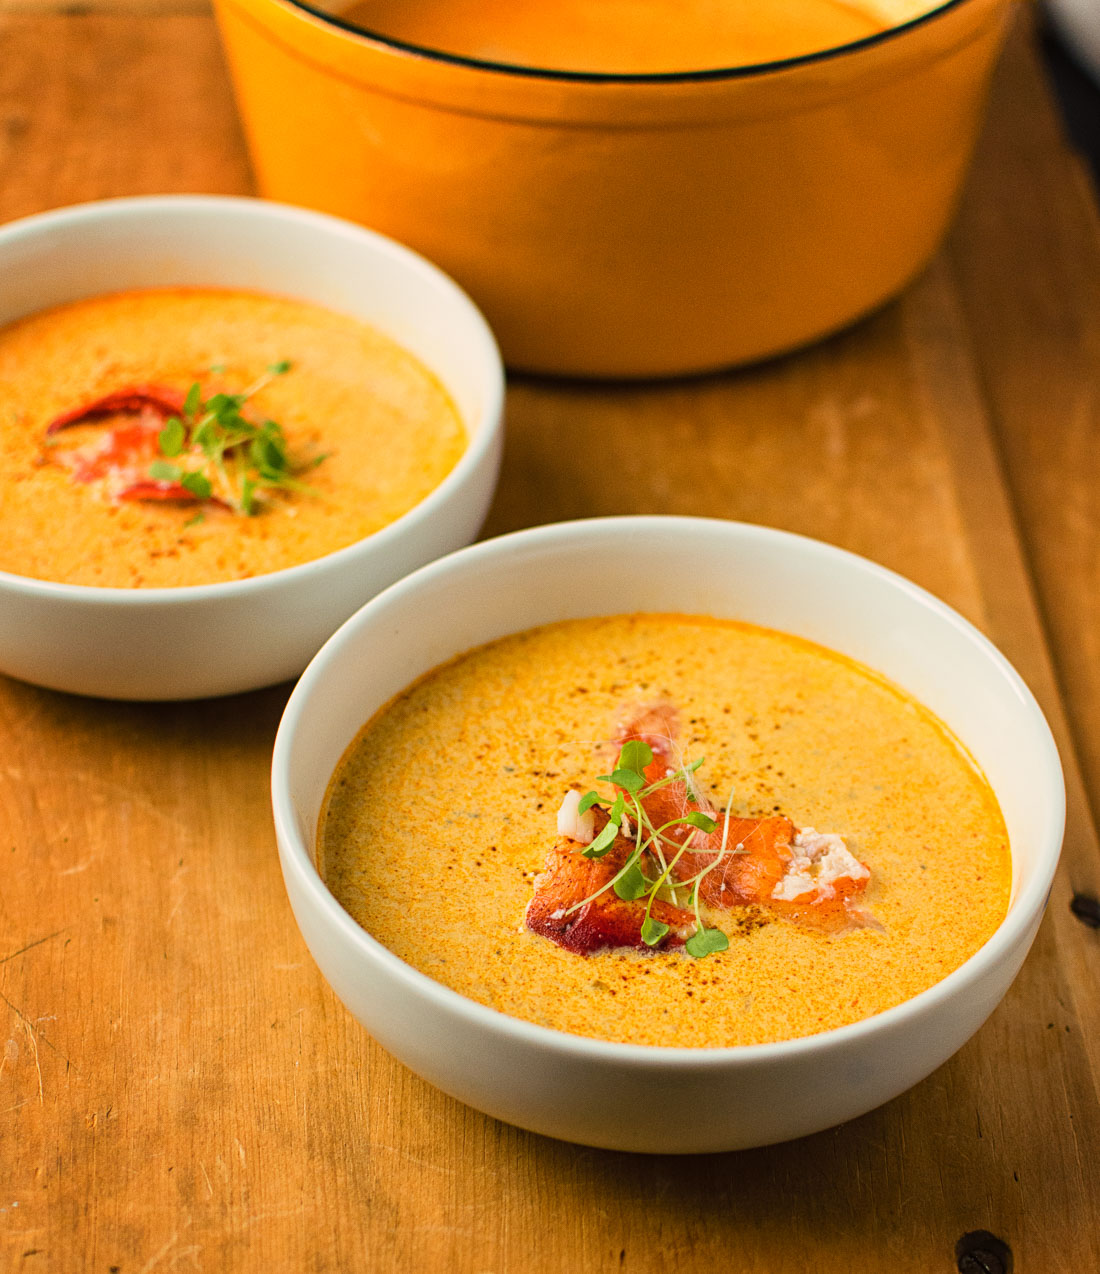 A simpler but deeply satisfying lobster bisque.